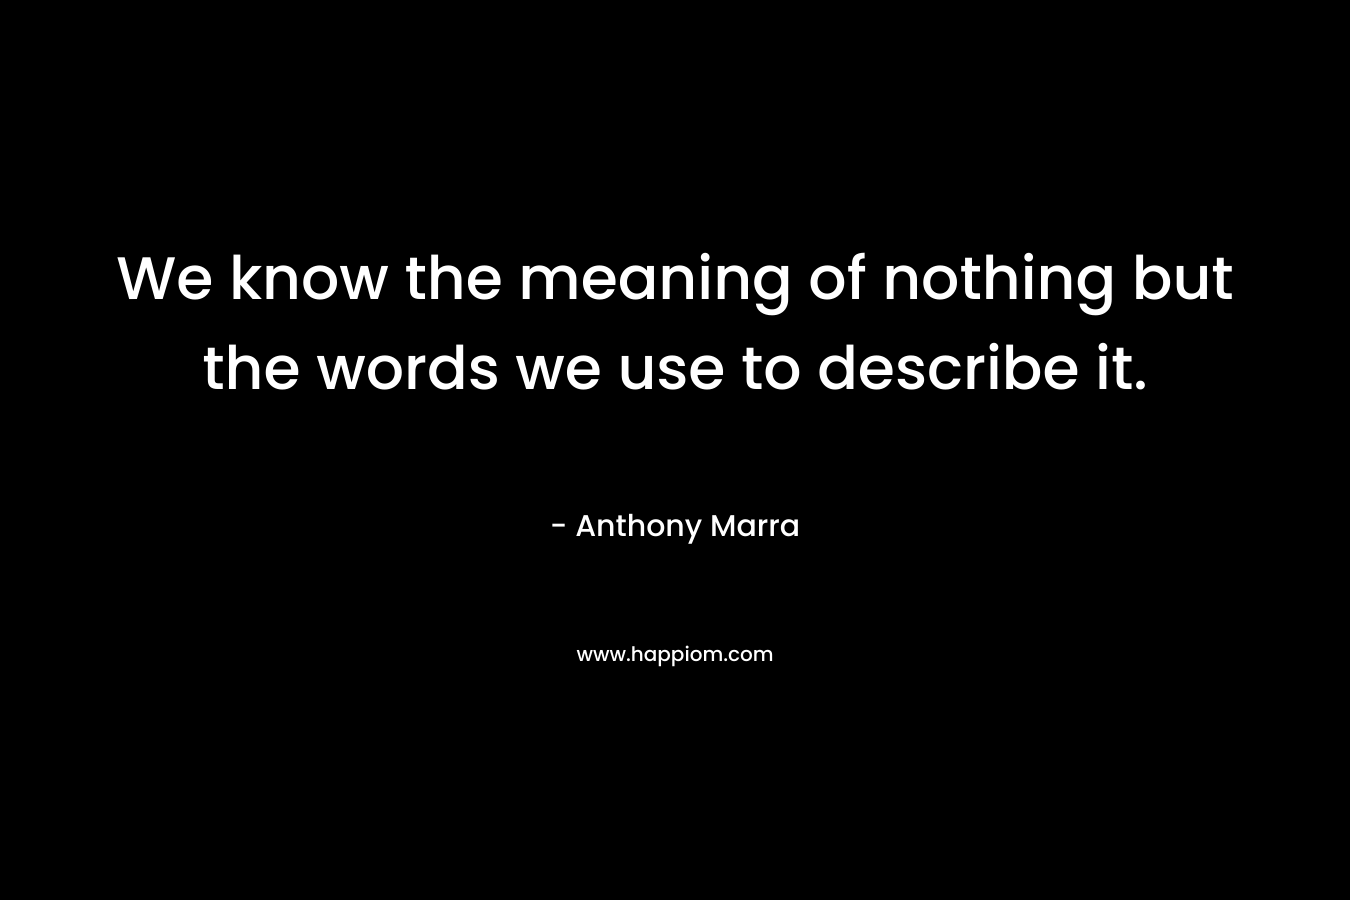 We know the meaning of nothing but the words we use to describe it.